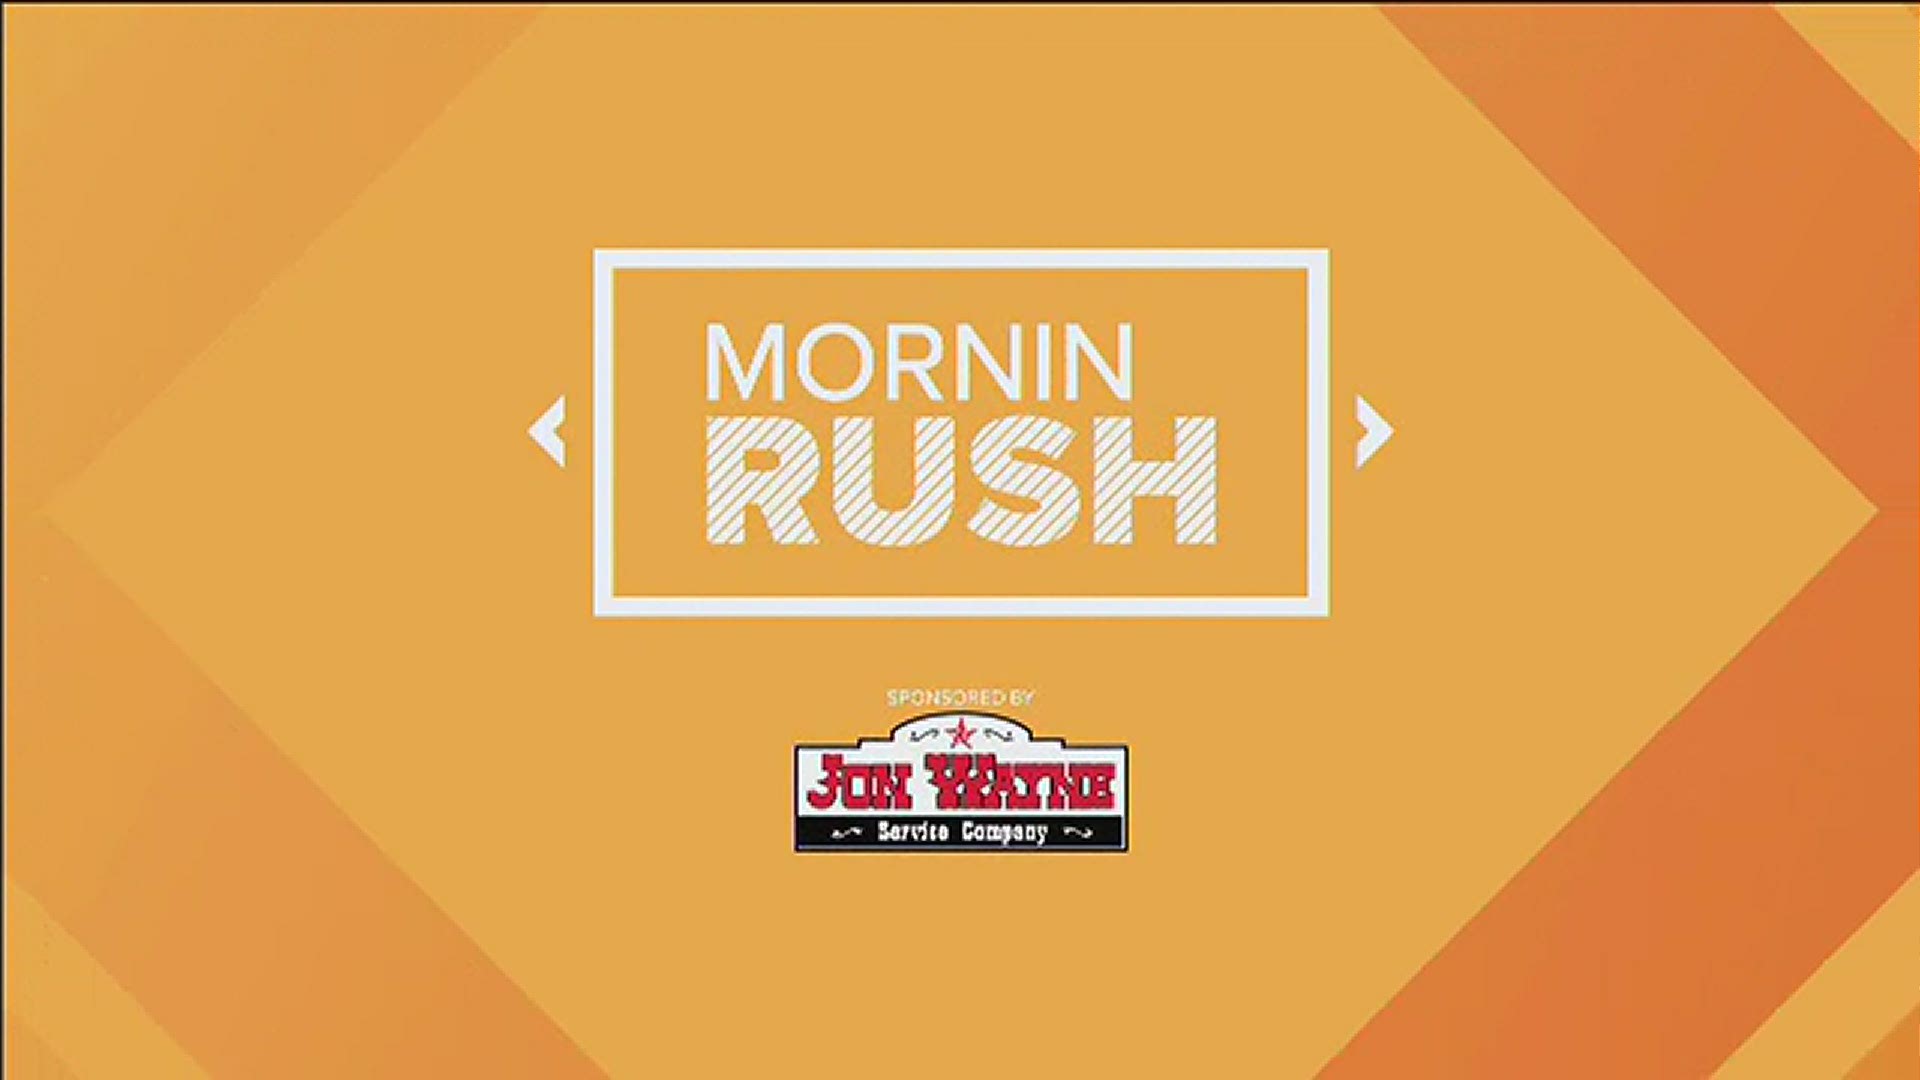 In today's Morning Rush, we're getting you caught up on everything you need to know before heading out the door.